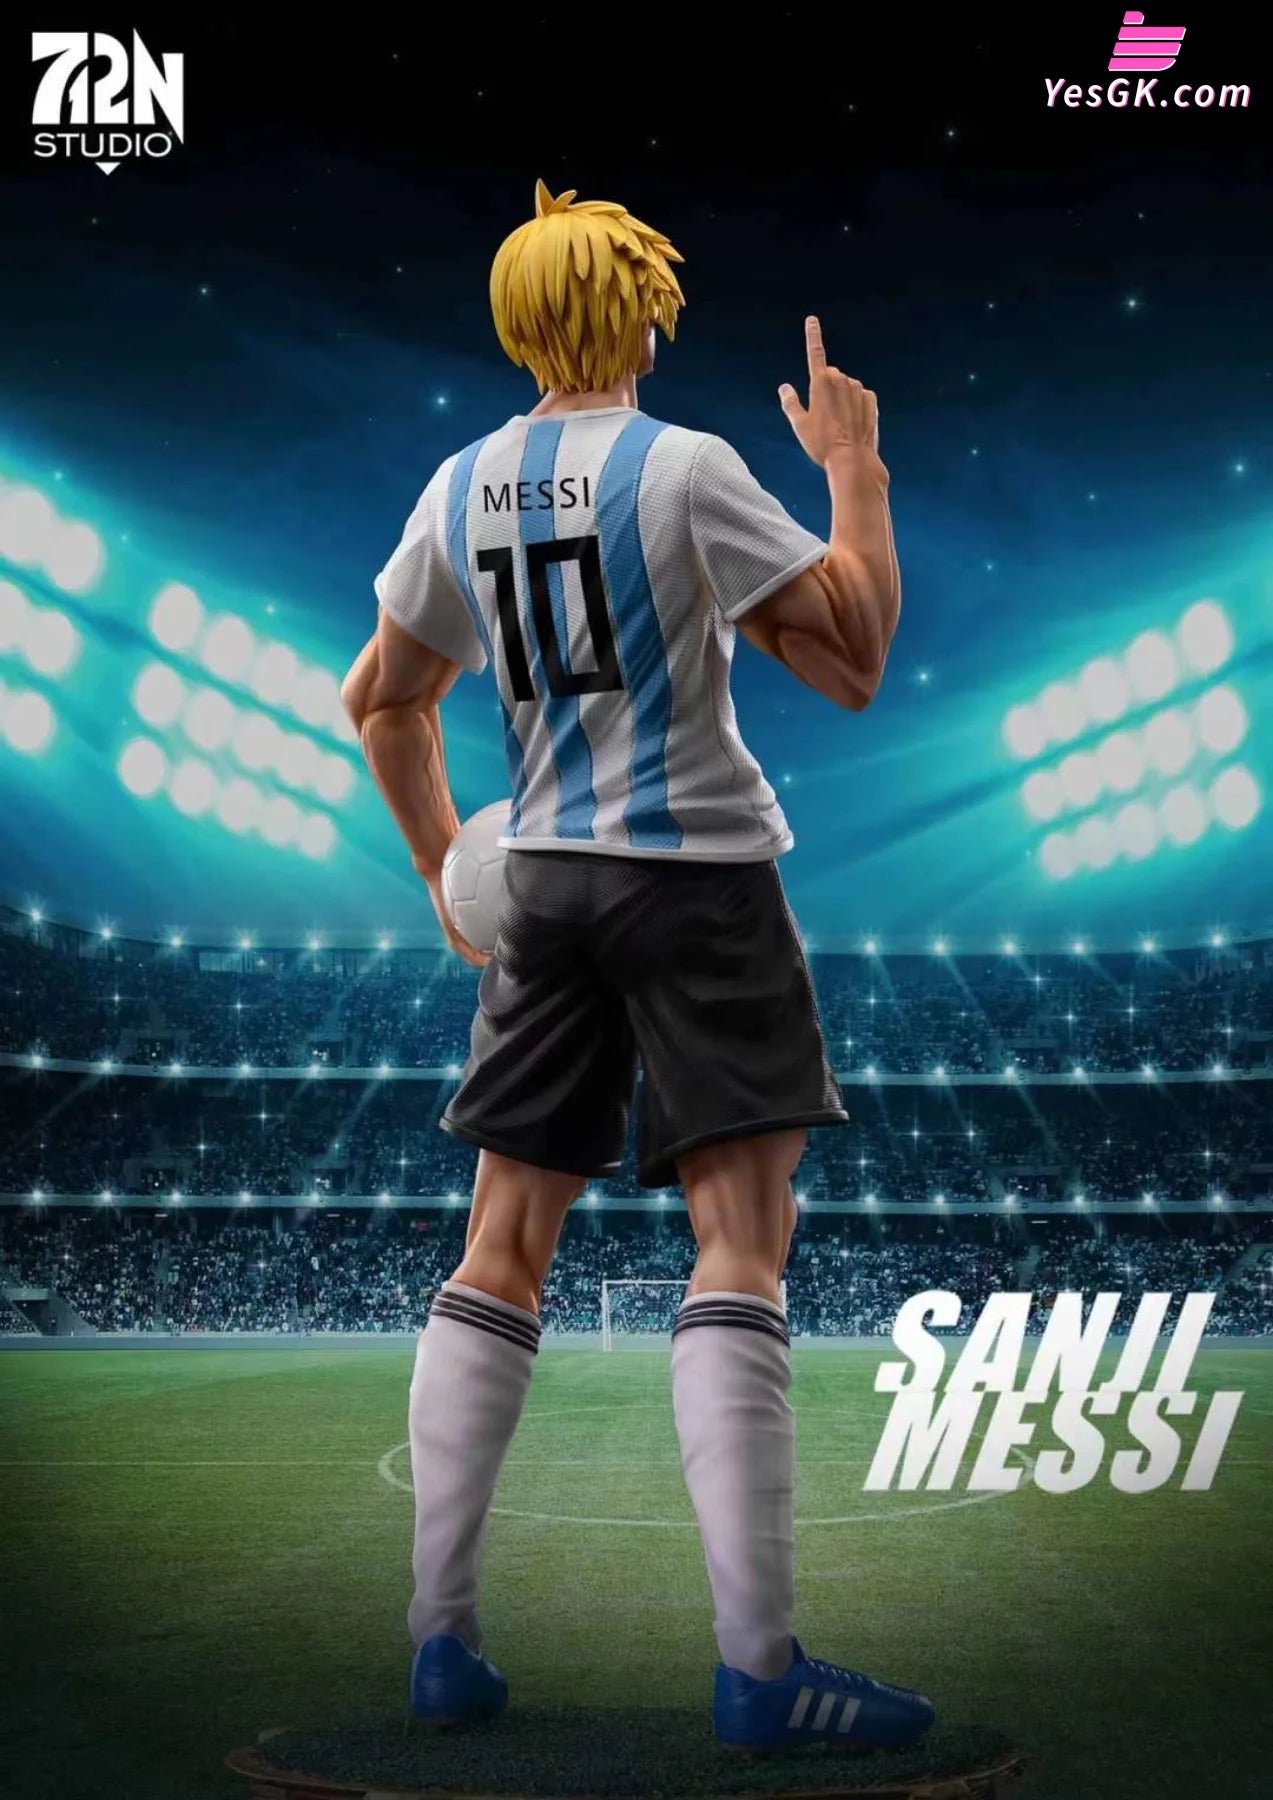 One Piece World Cup Sanji Cos Messi Statue - 712N Studio [In Stock]